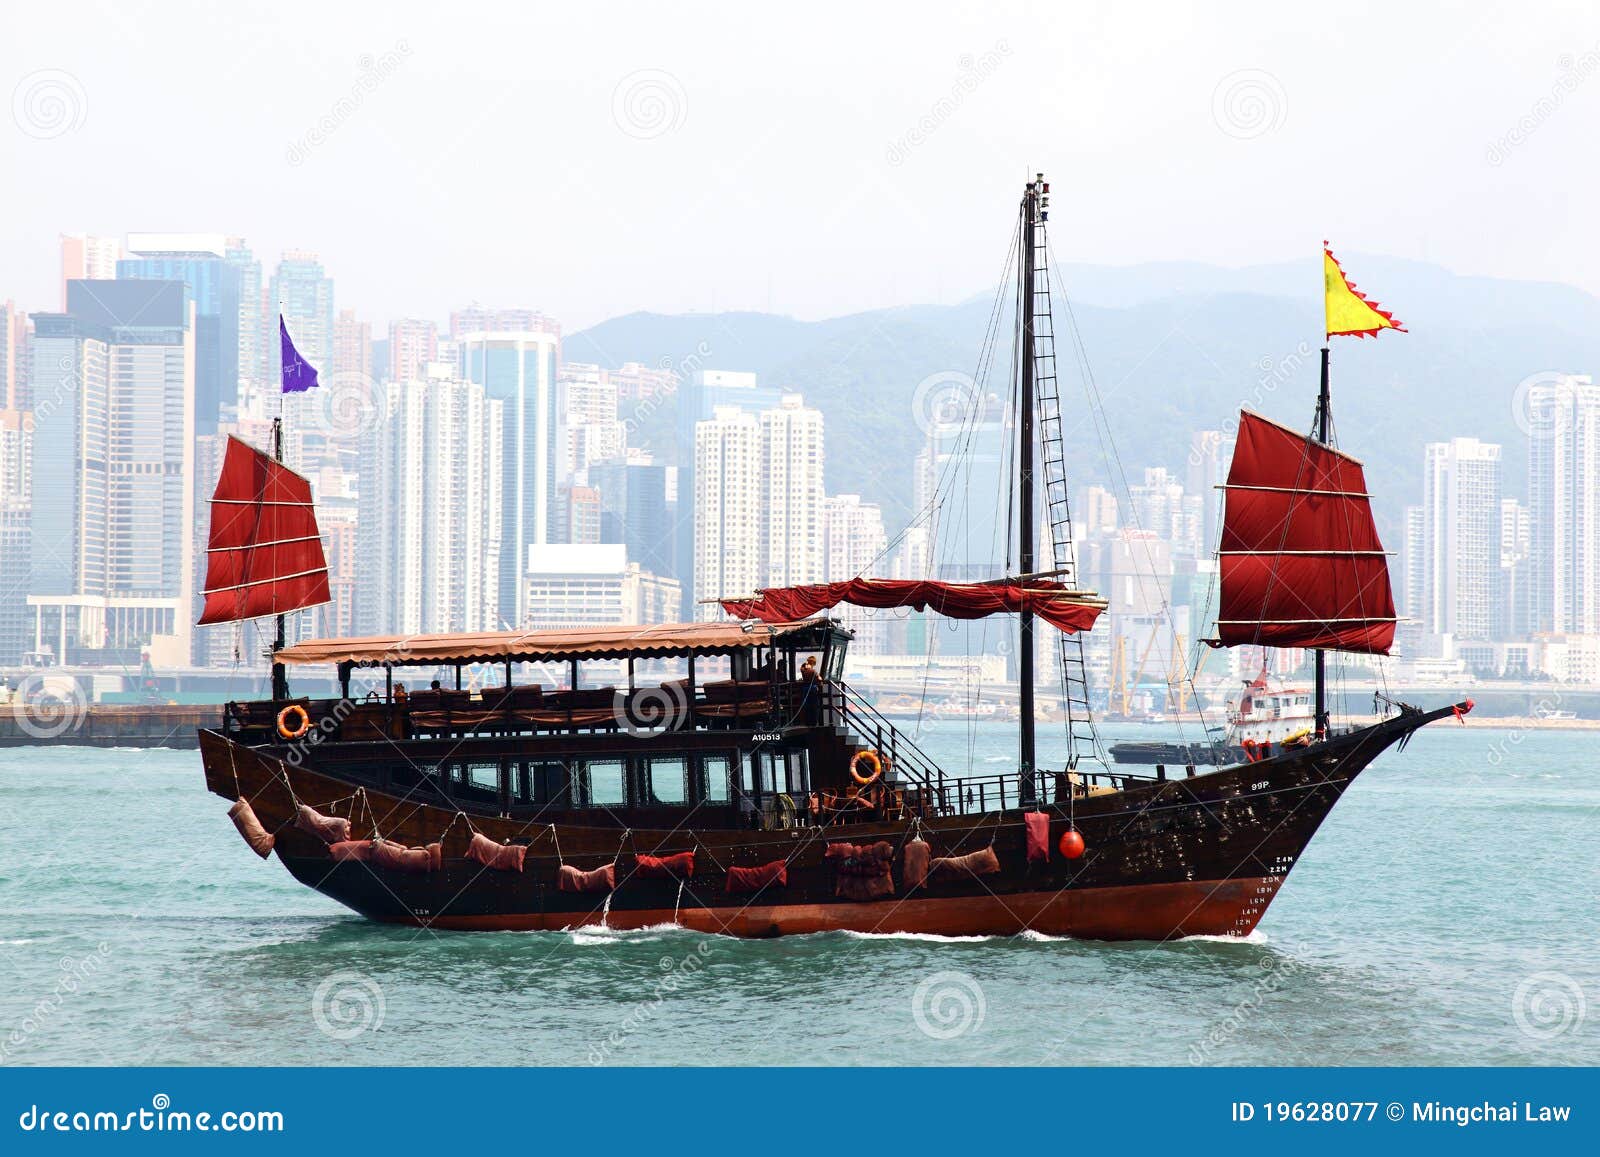 chinese junk stock image. image of building, boat, yellow